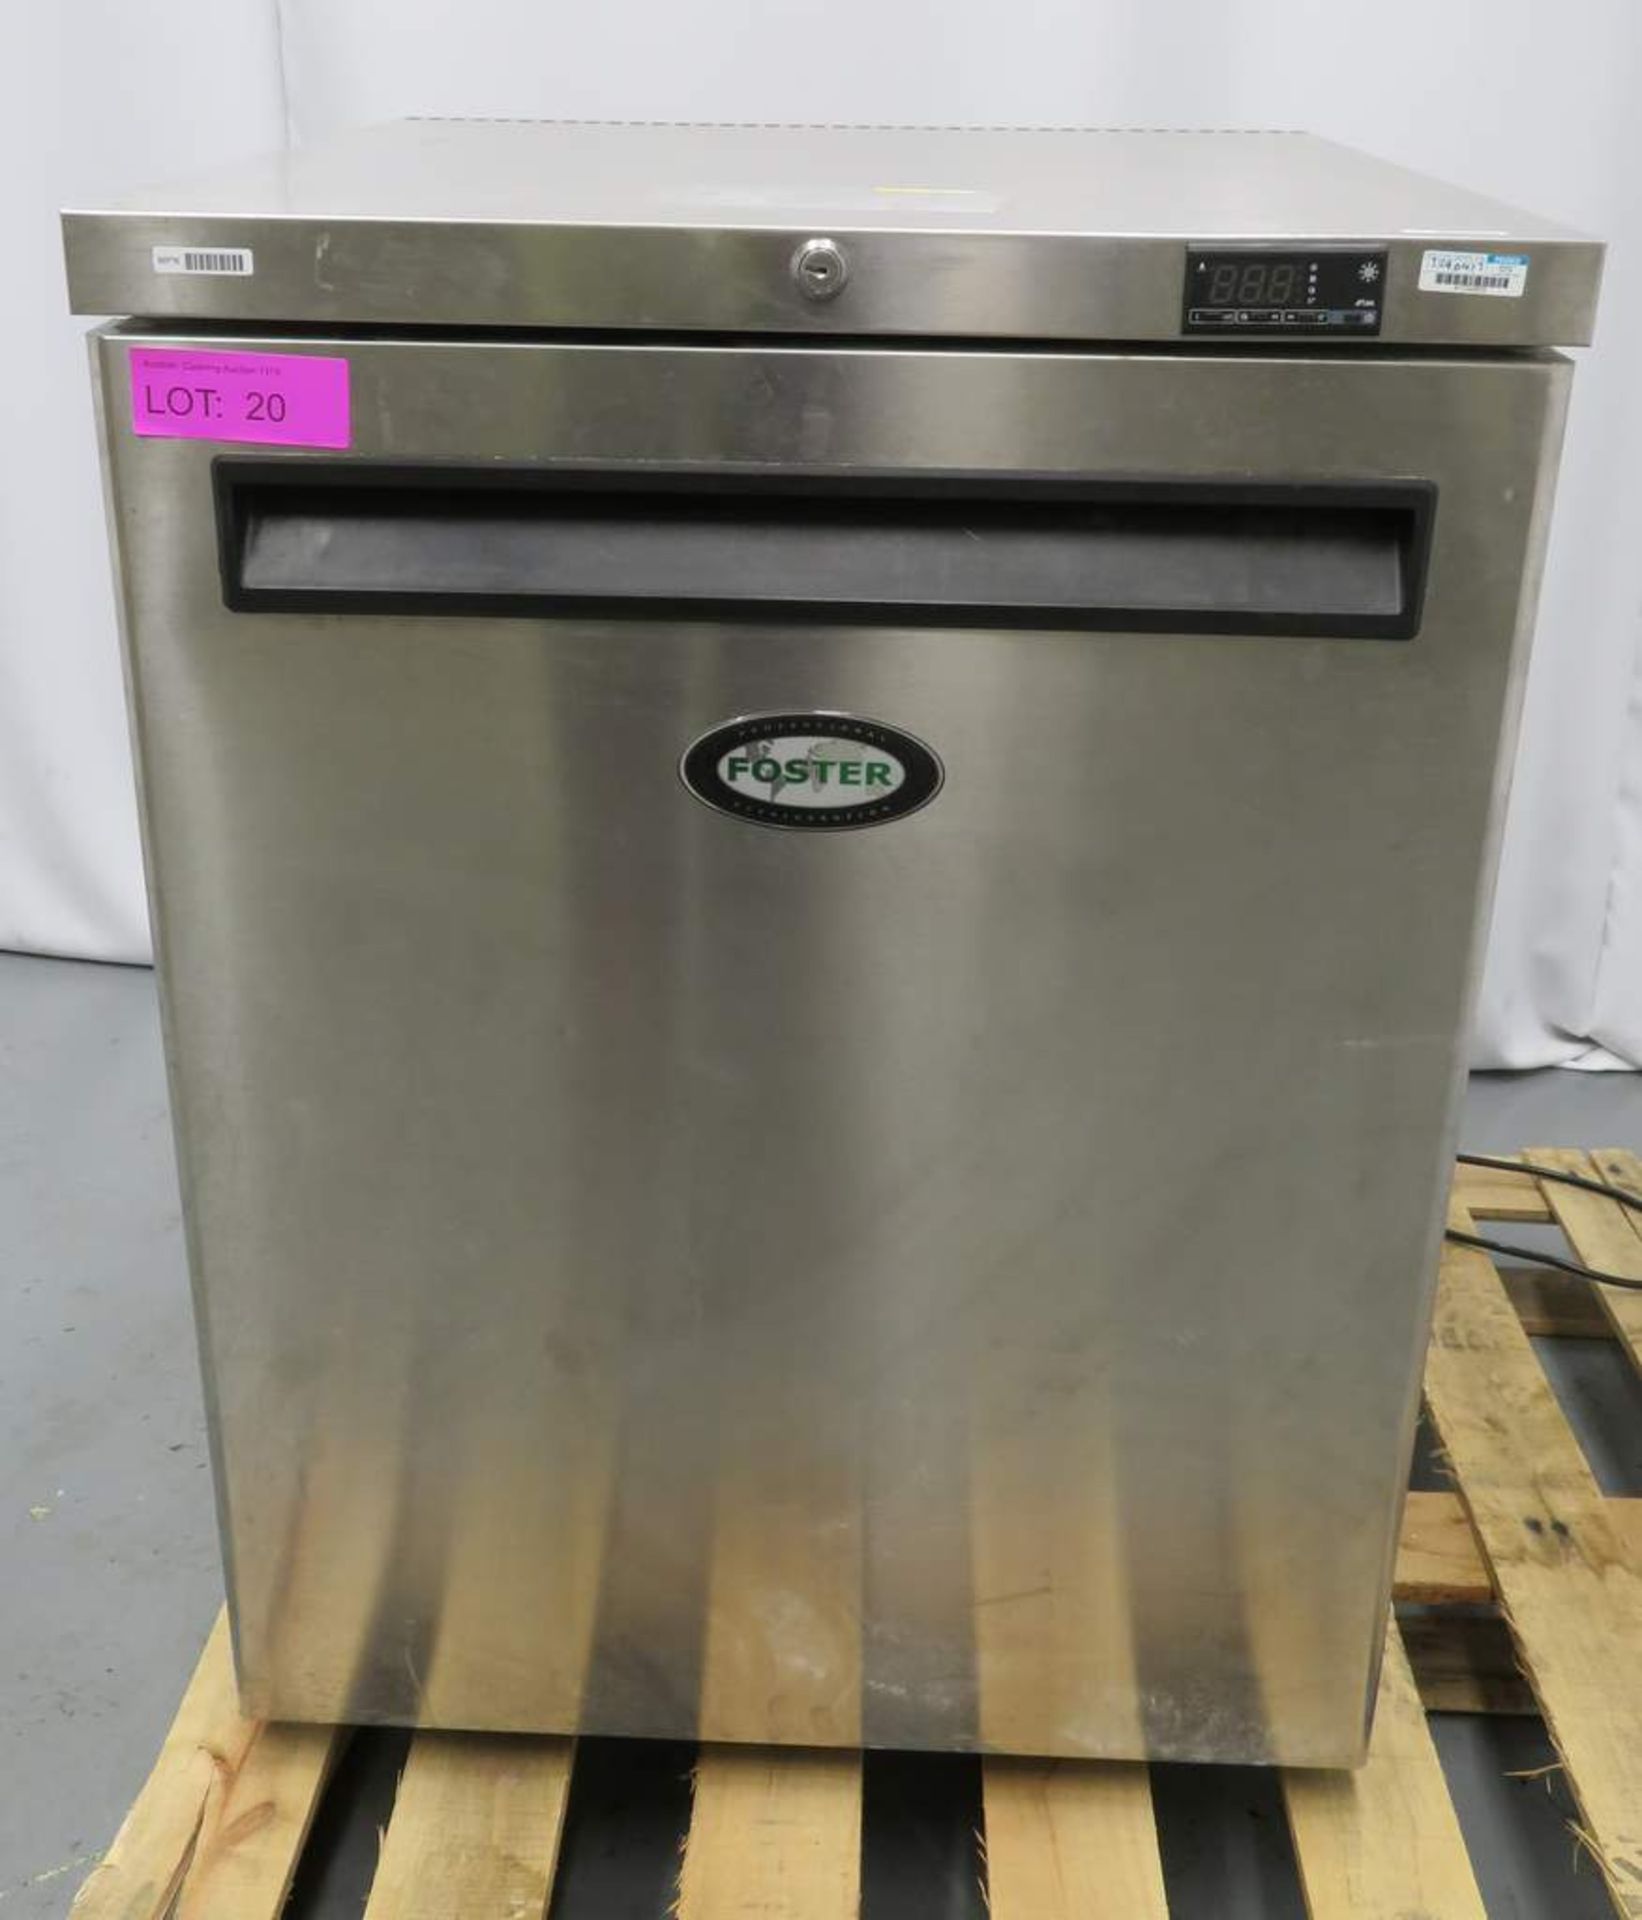 Foster HR150-A Refrigerator. Dimensions: 600x640x820mm (LxWxH) - Image 2 of 7